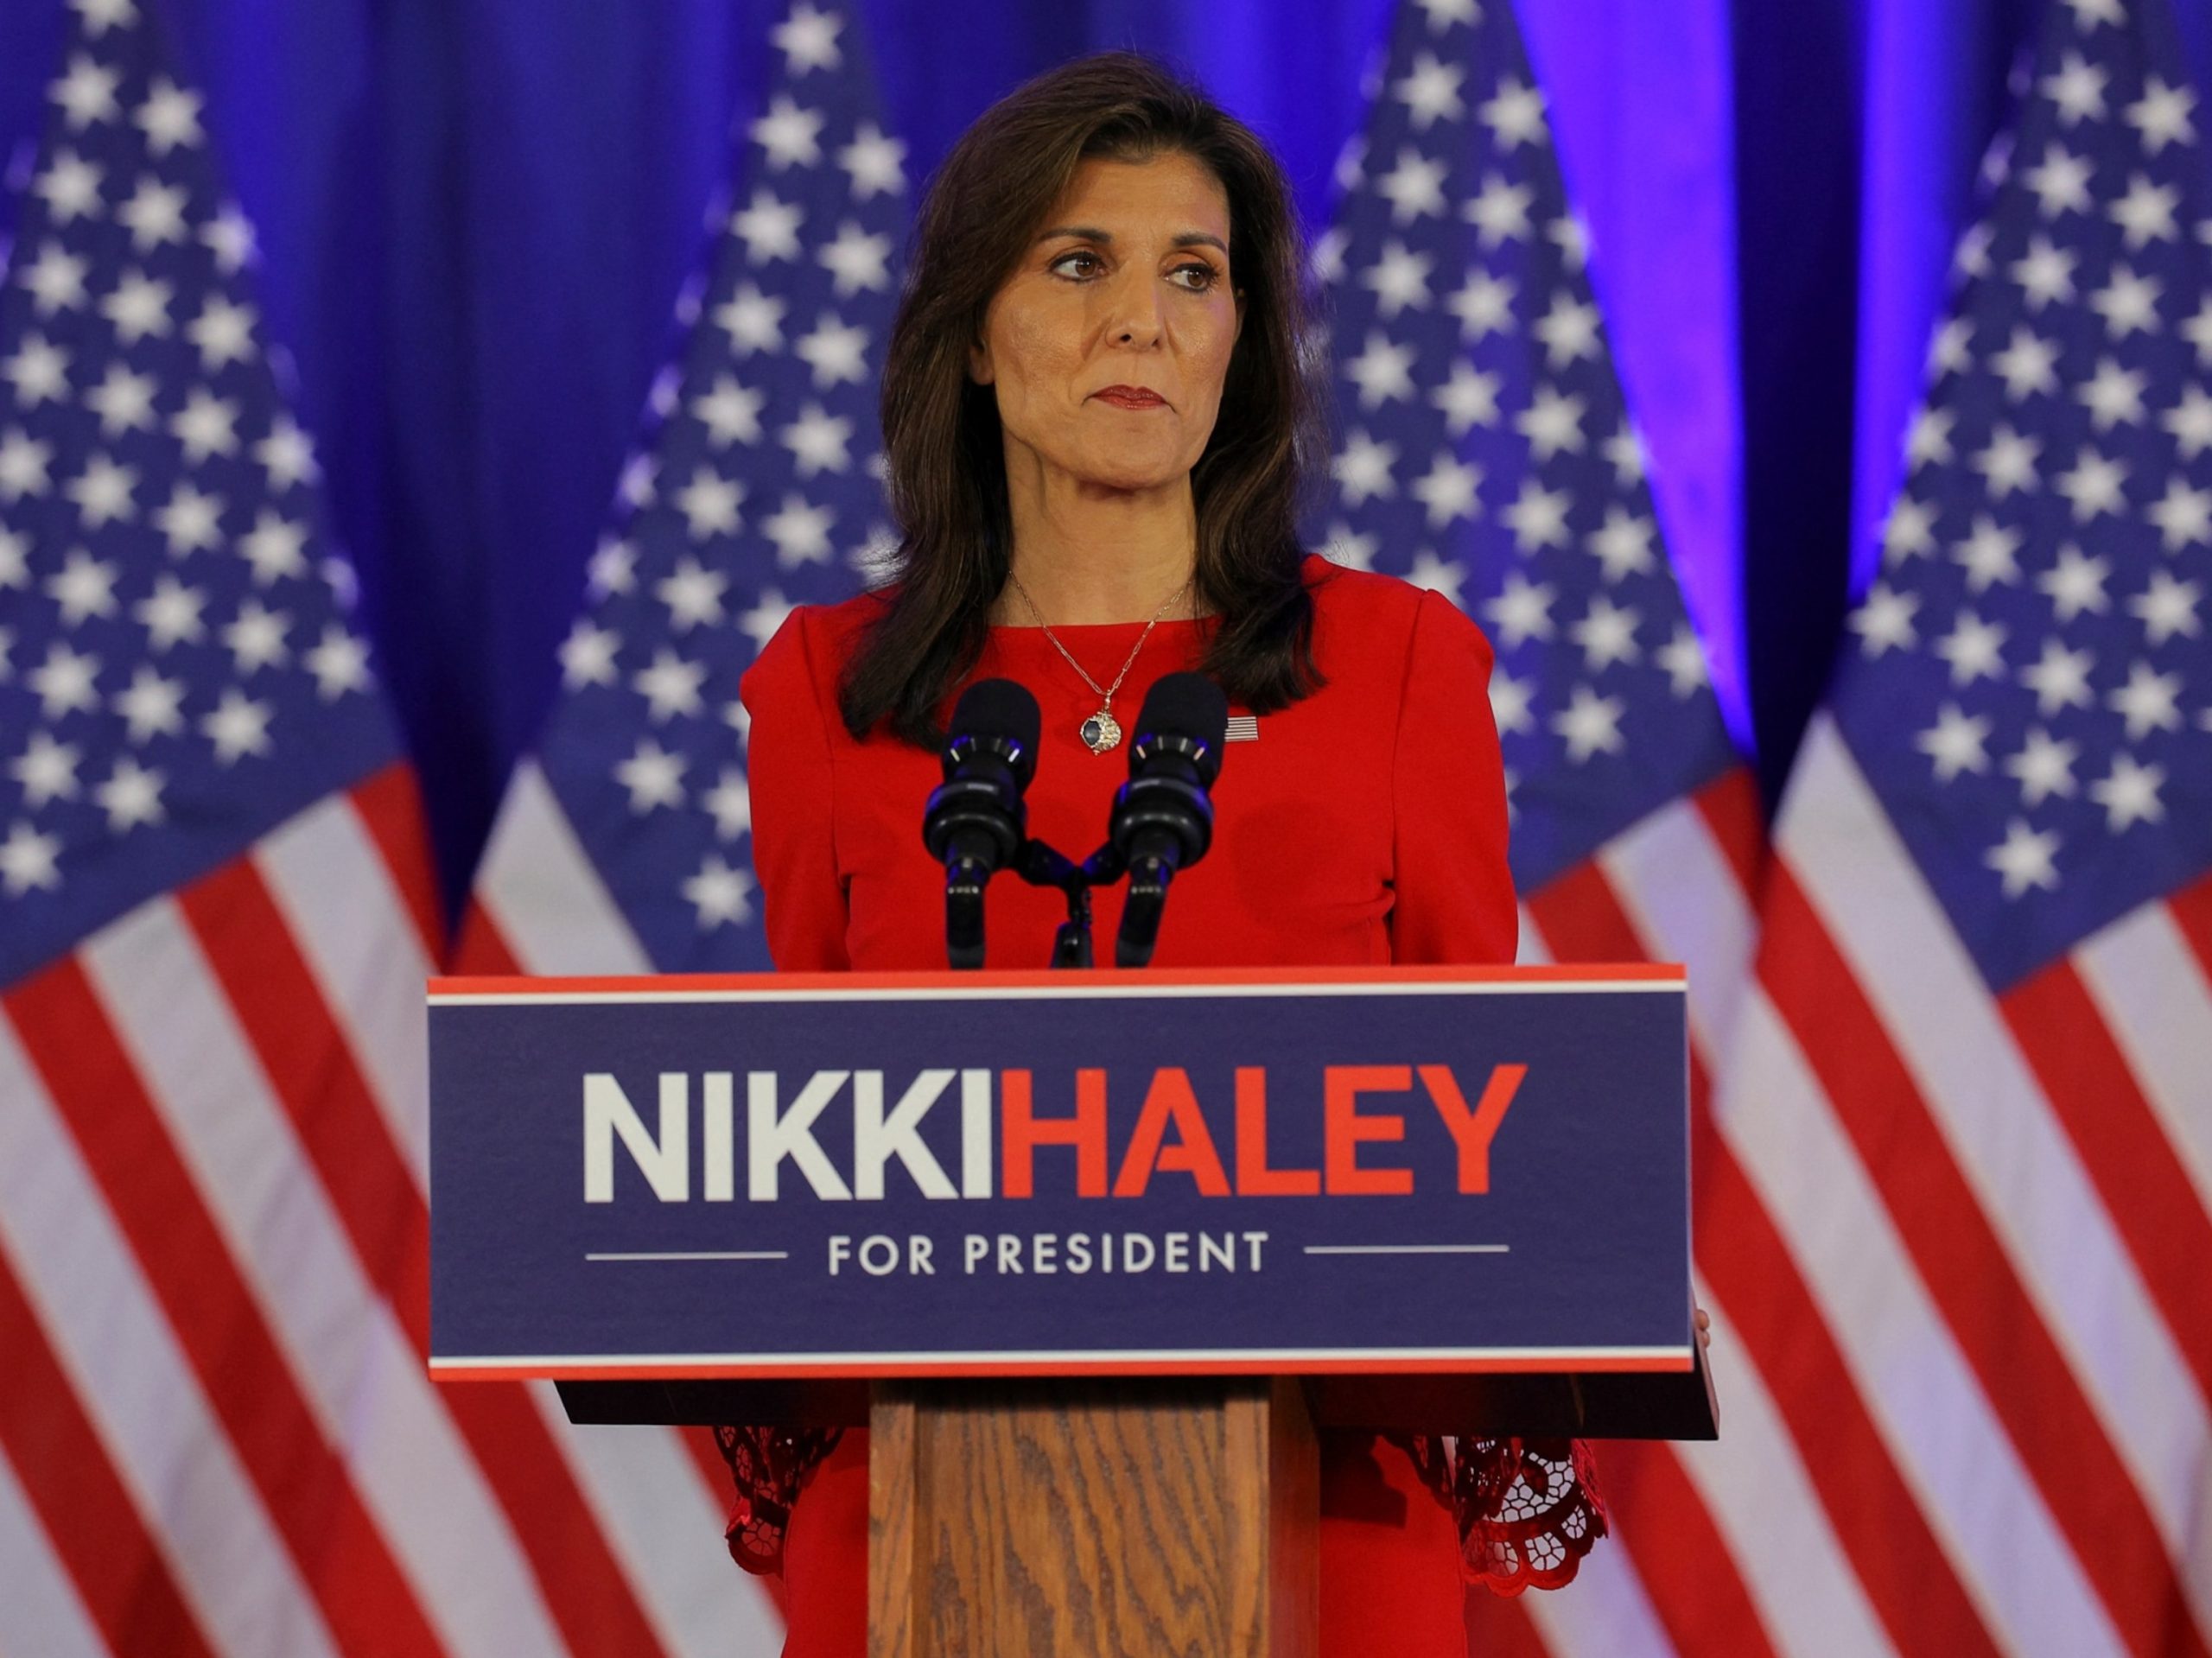 Nikki Haley suspends 2024 presidential campaign and refrains from endorsing Donald Trump